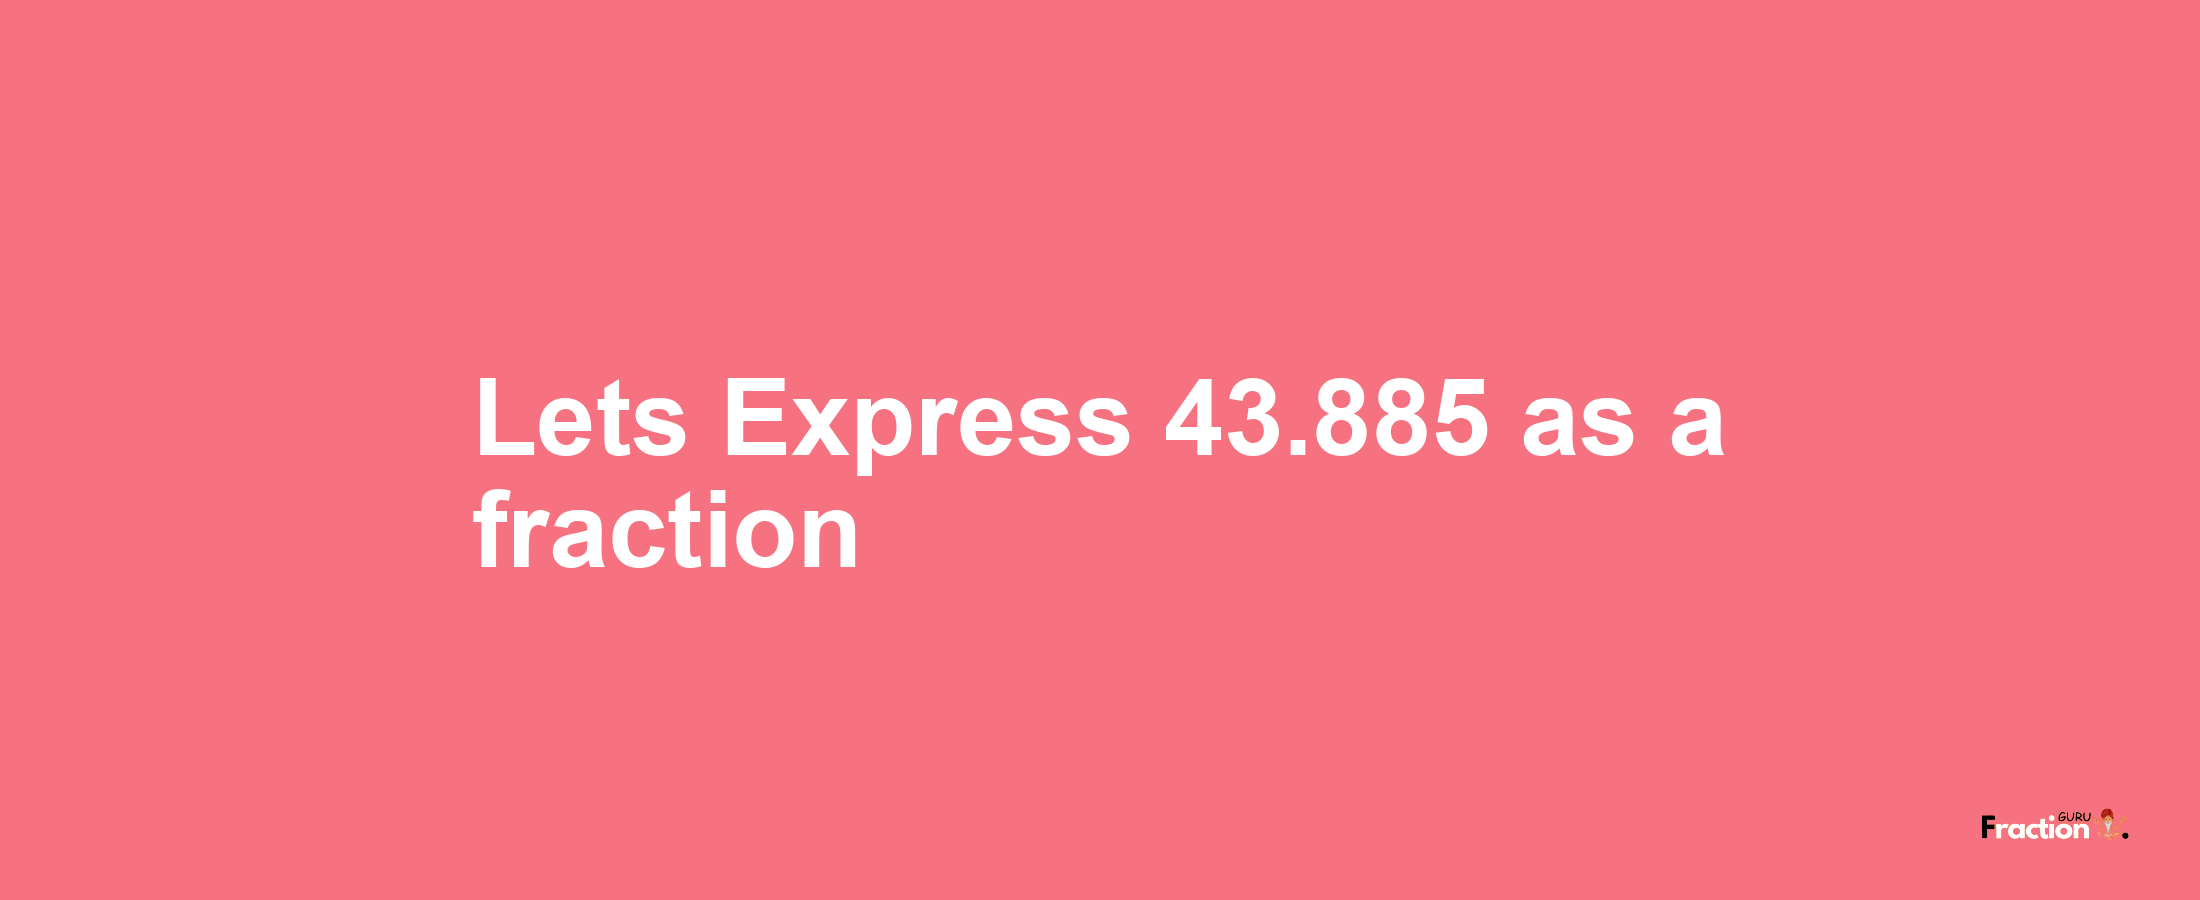 Lets Express 43.885 as afraction